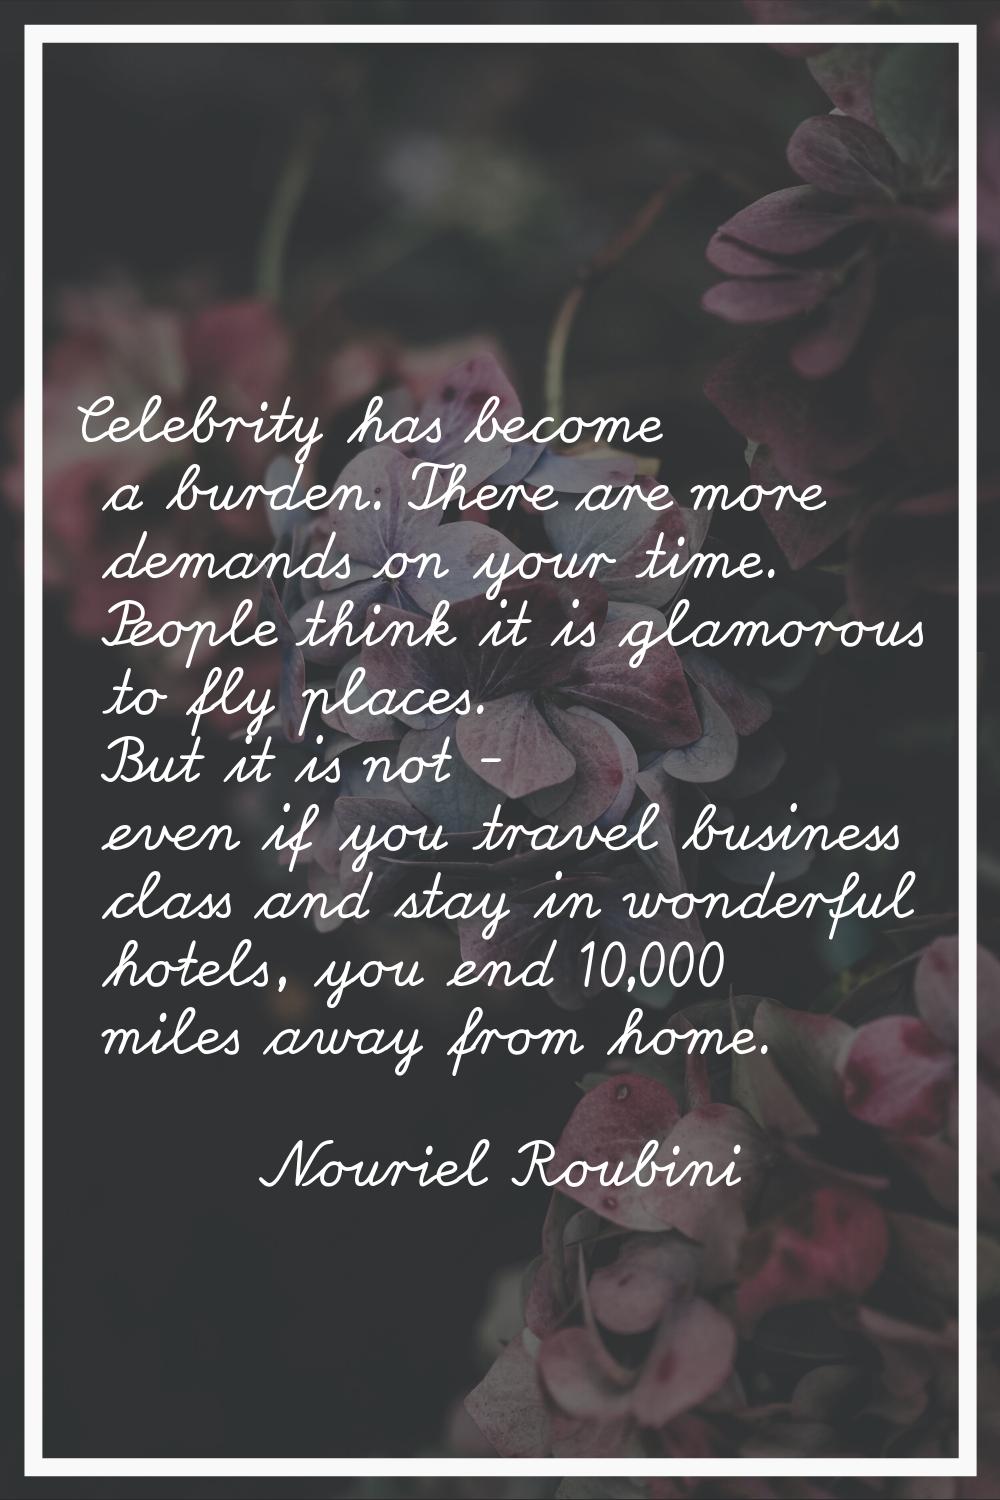 Celebrity has become a burden. There are more demands on your time. People think it is glamorous to